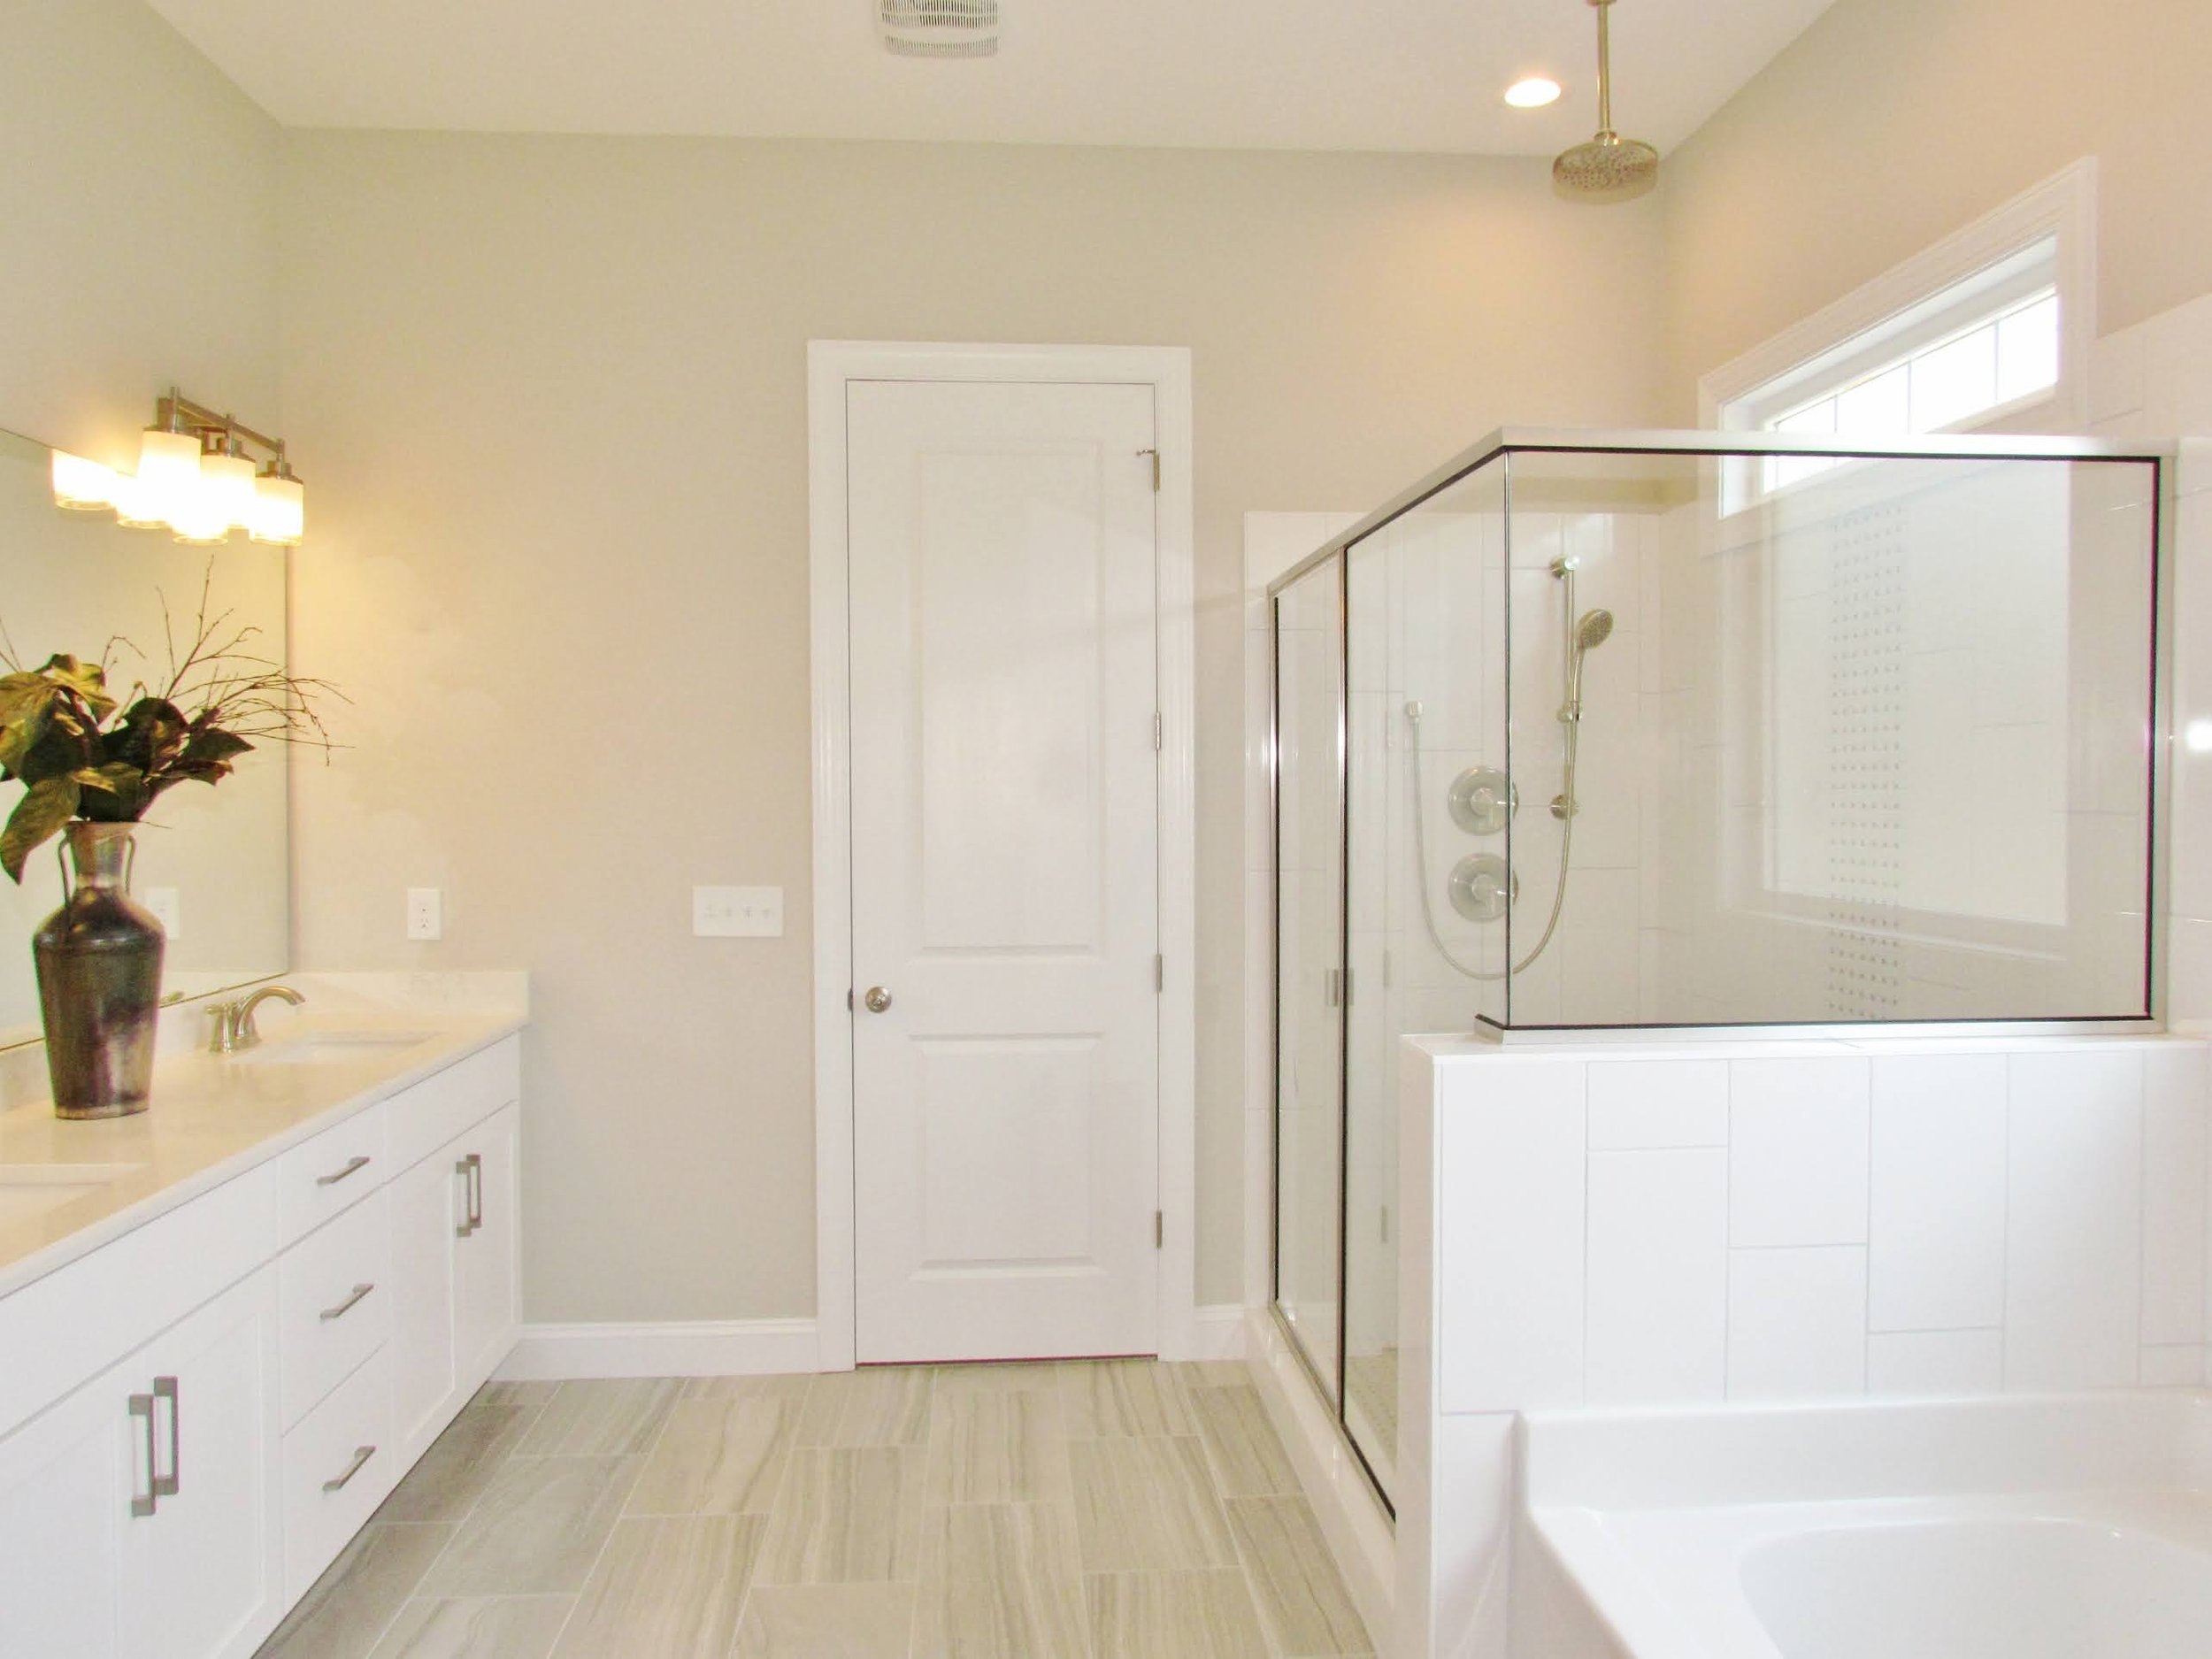 The Bowie Master Bathroom Overview.jpg